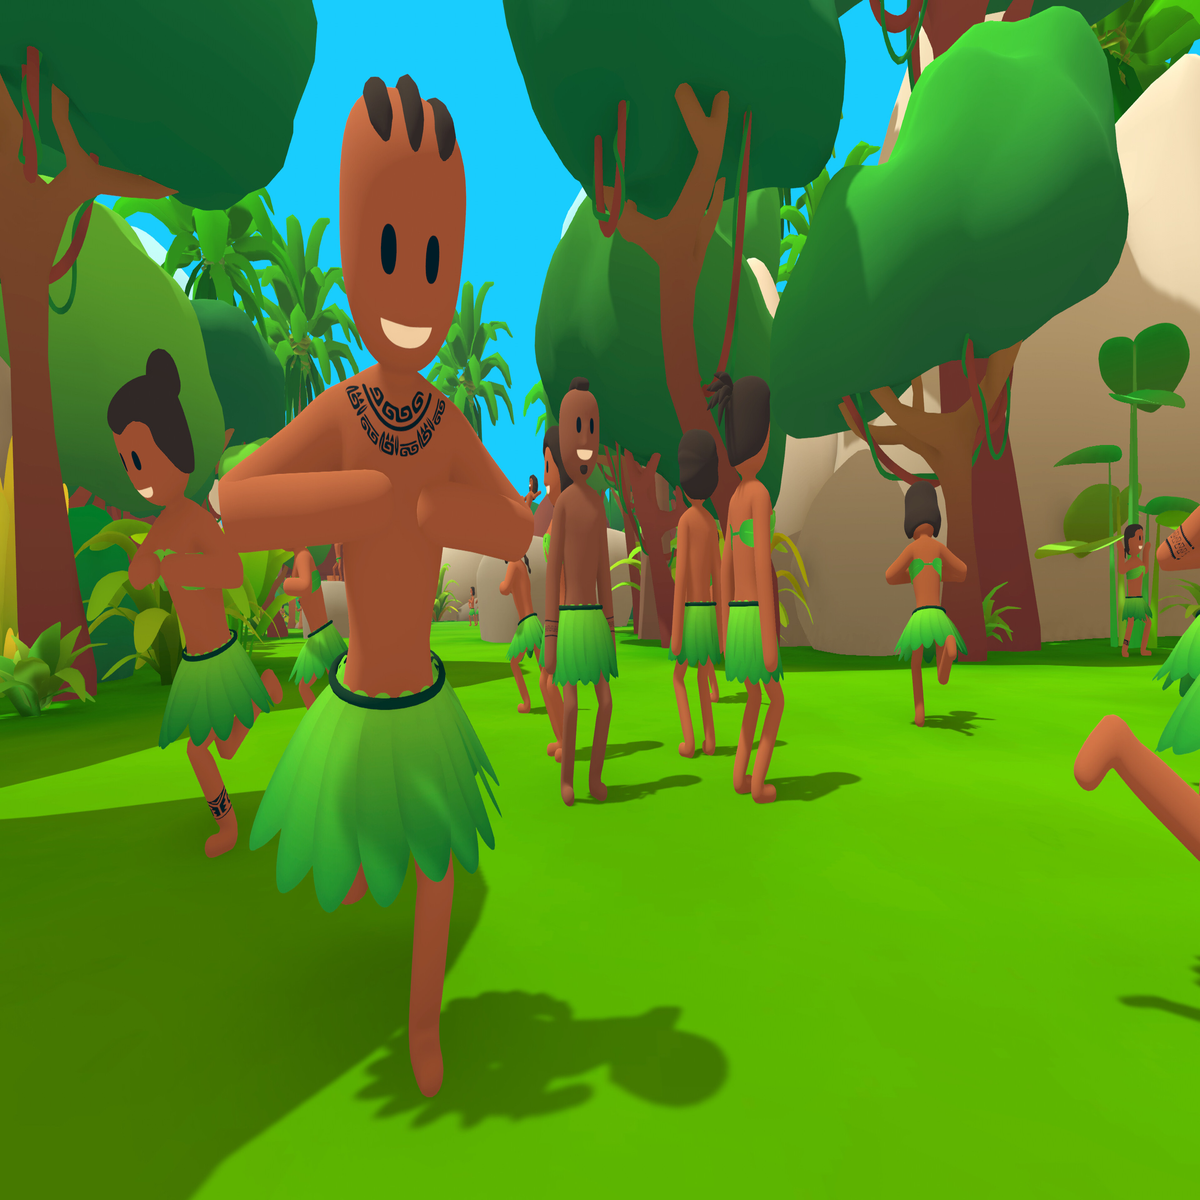 Pineapple on Pizza Hits Steam as Free Game, Lets You Explore Island Full of  Dancing People - TechEBlog